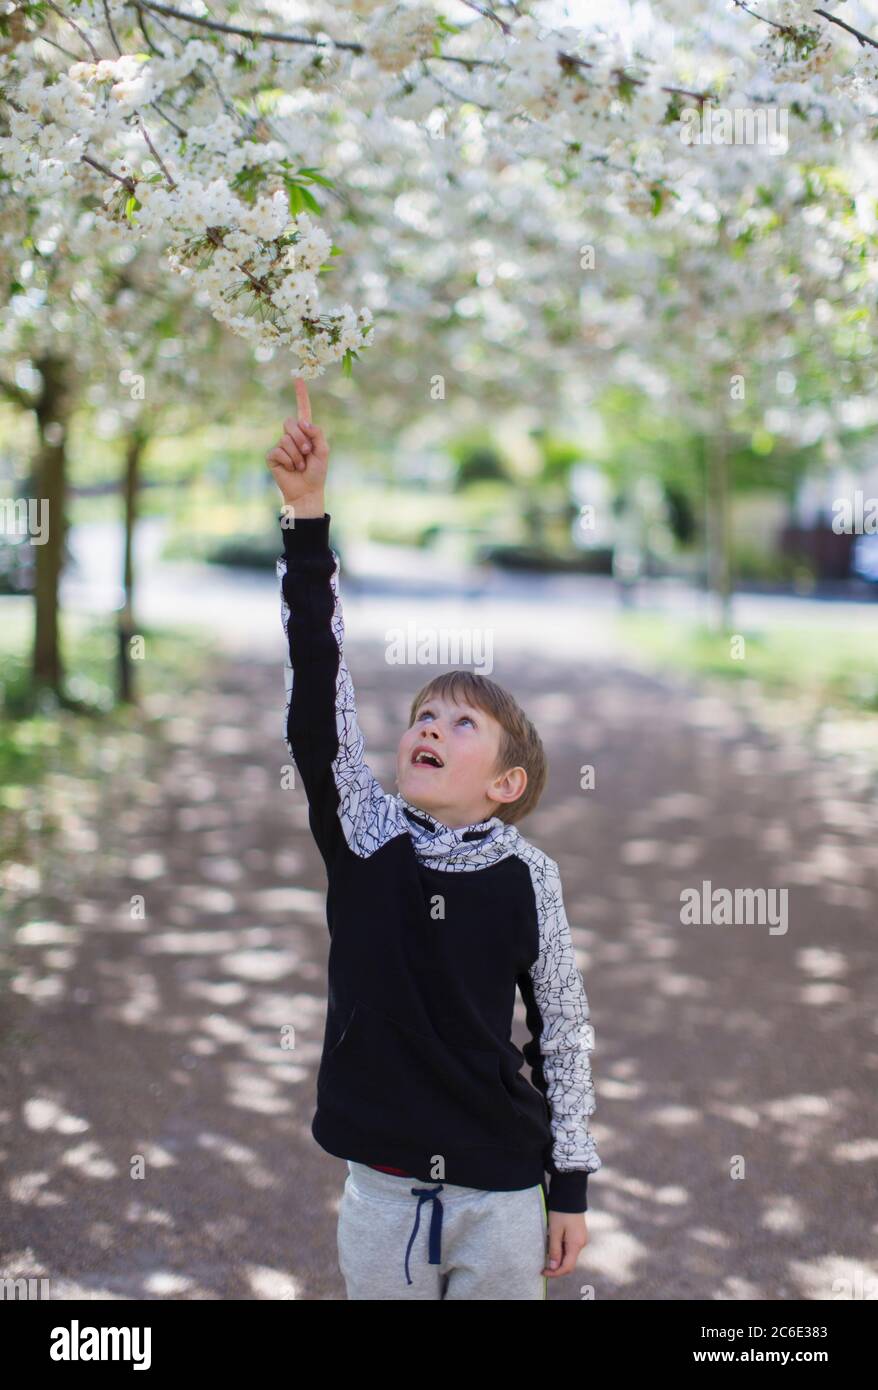 Boy reaching for apple blossoms on tree in park Stock Photo